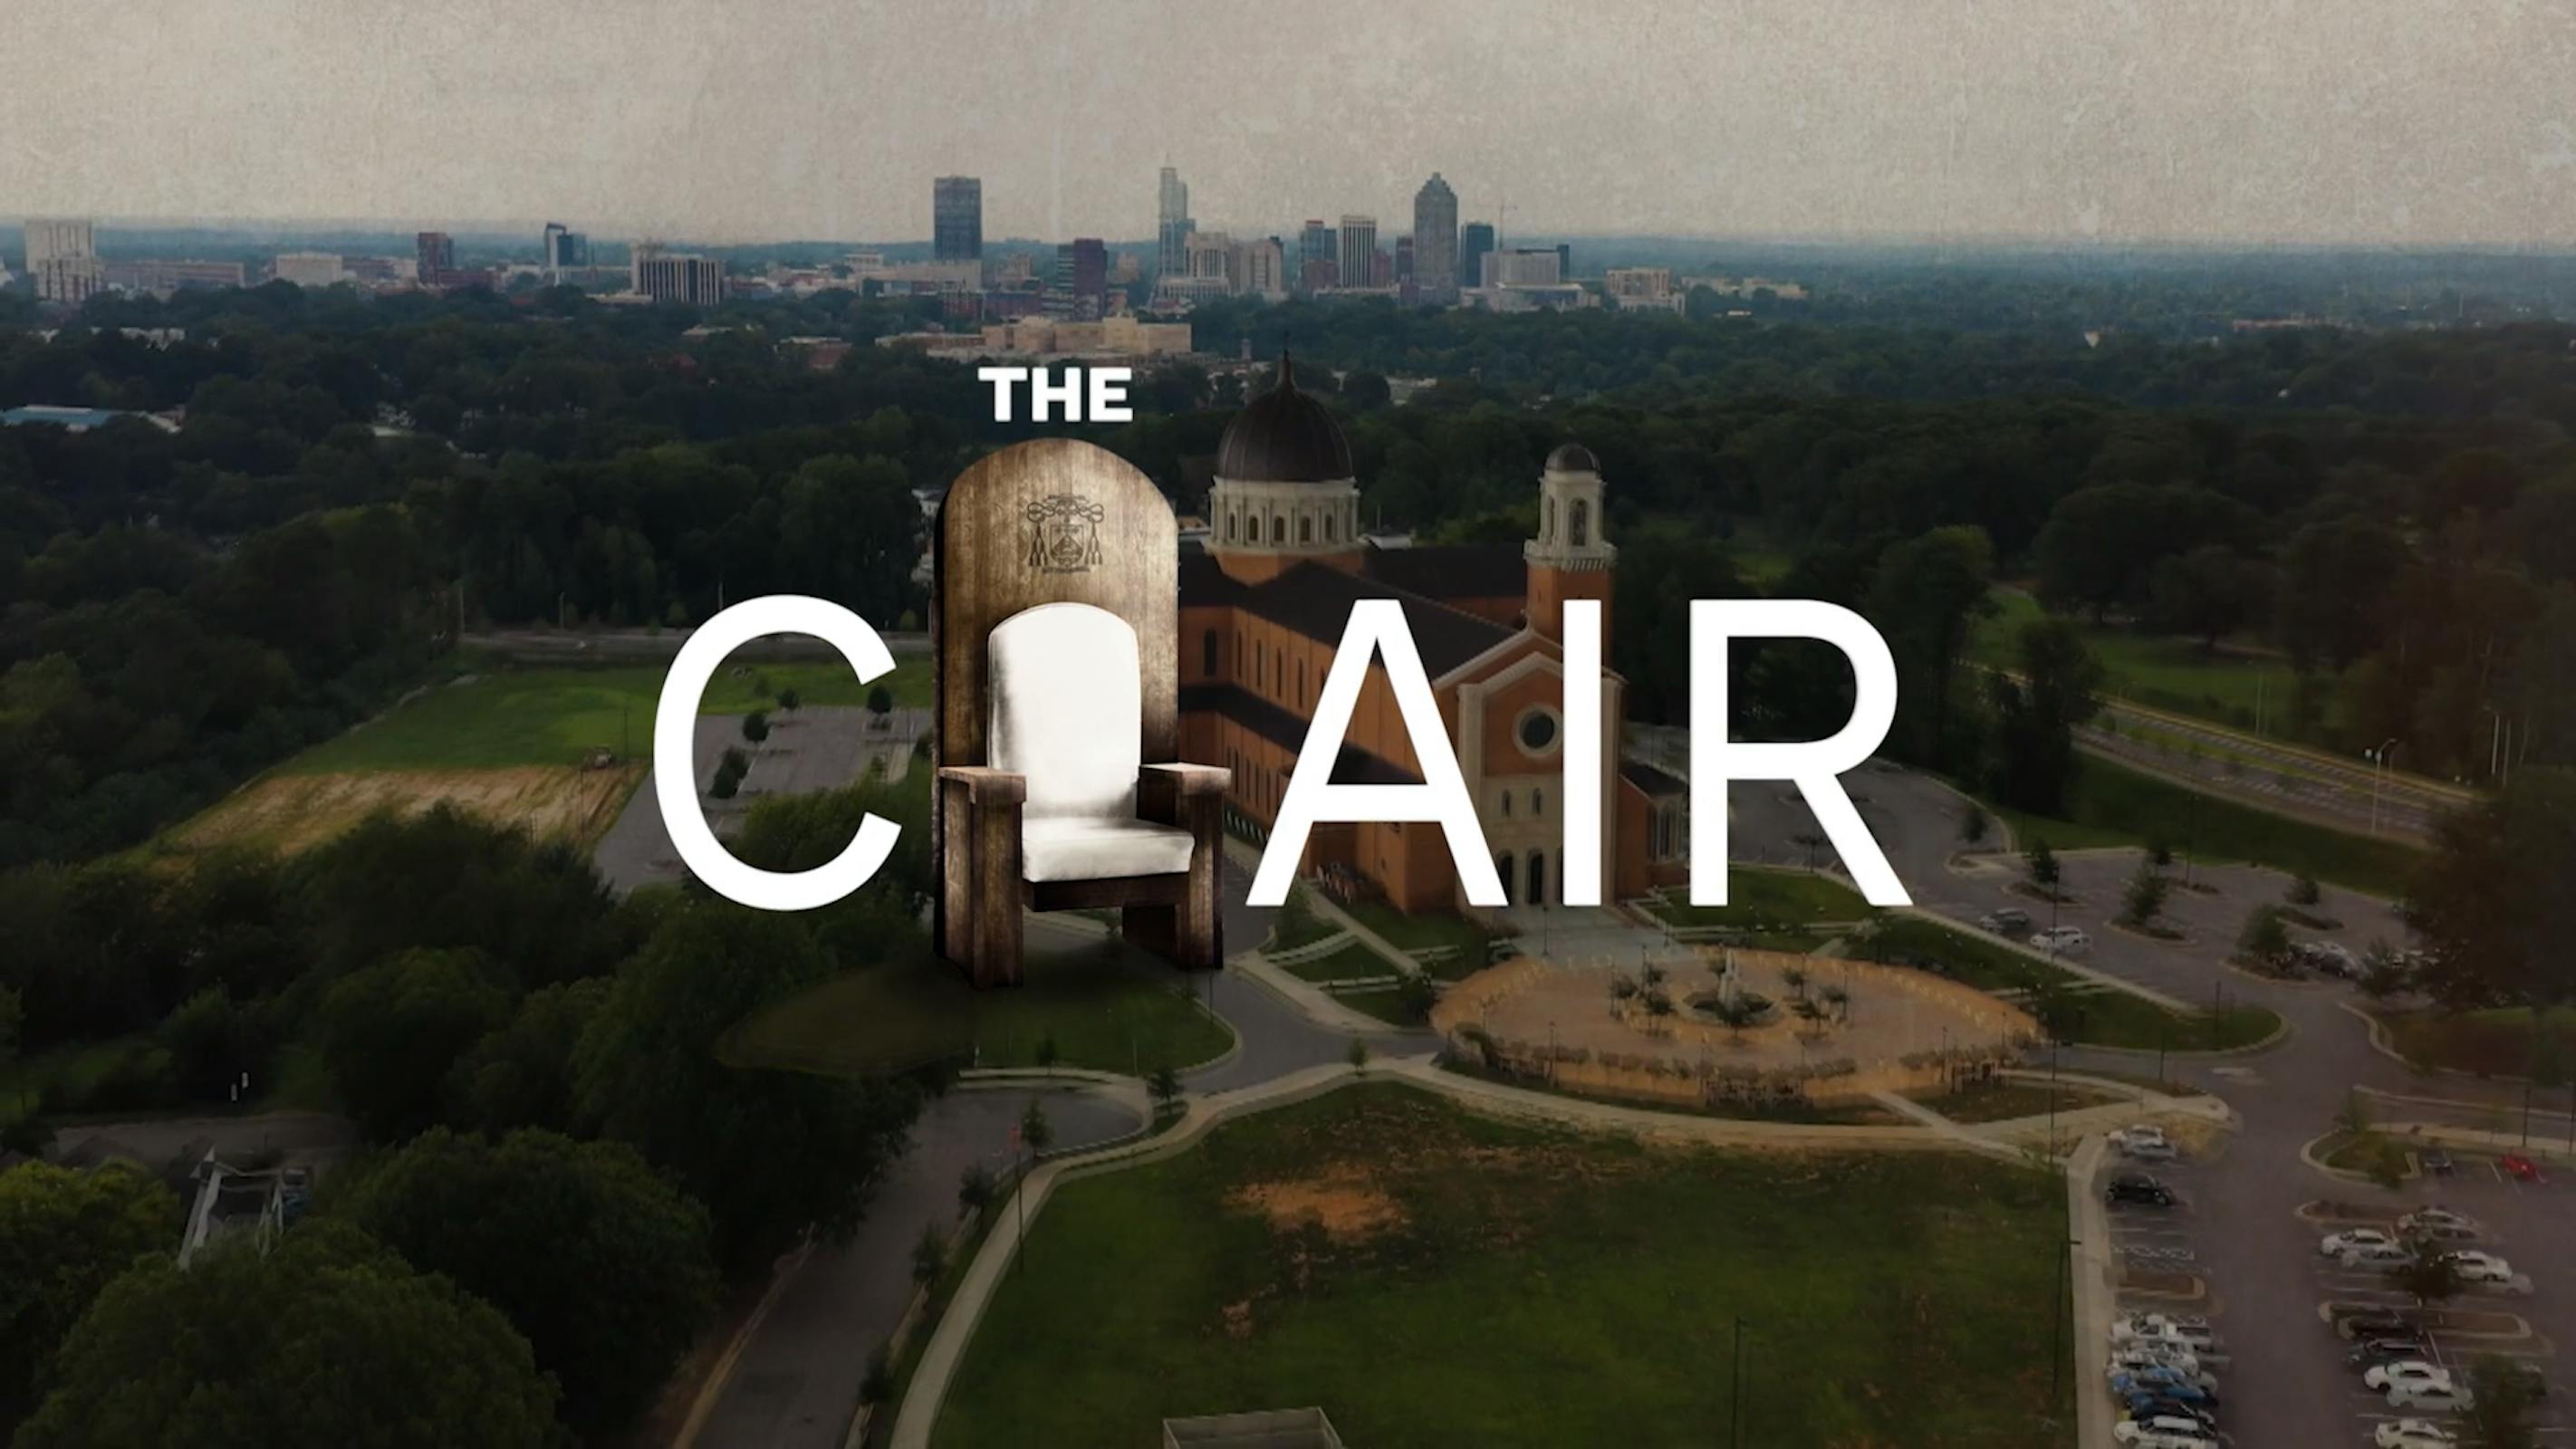 A 22-minute episode of "The Chair," a documentary produced by DeSales Media, features the history of the Archdiocese of Detroit from Fr. Gabriel Richard and Blessed Solanus Casey to Detroit's current archbishop, Allen H. Vigneron. (Screengrab via DeSales Media)